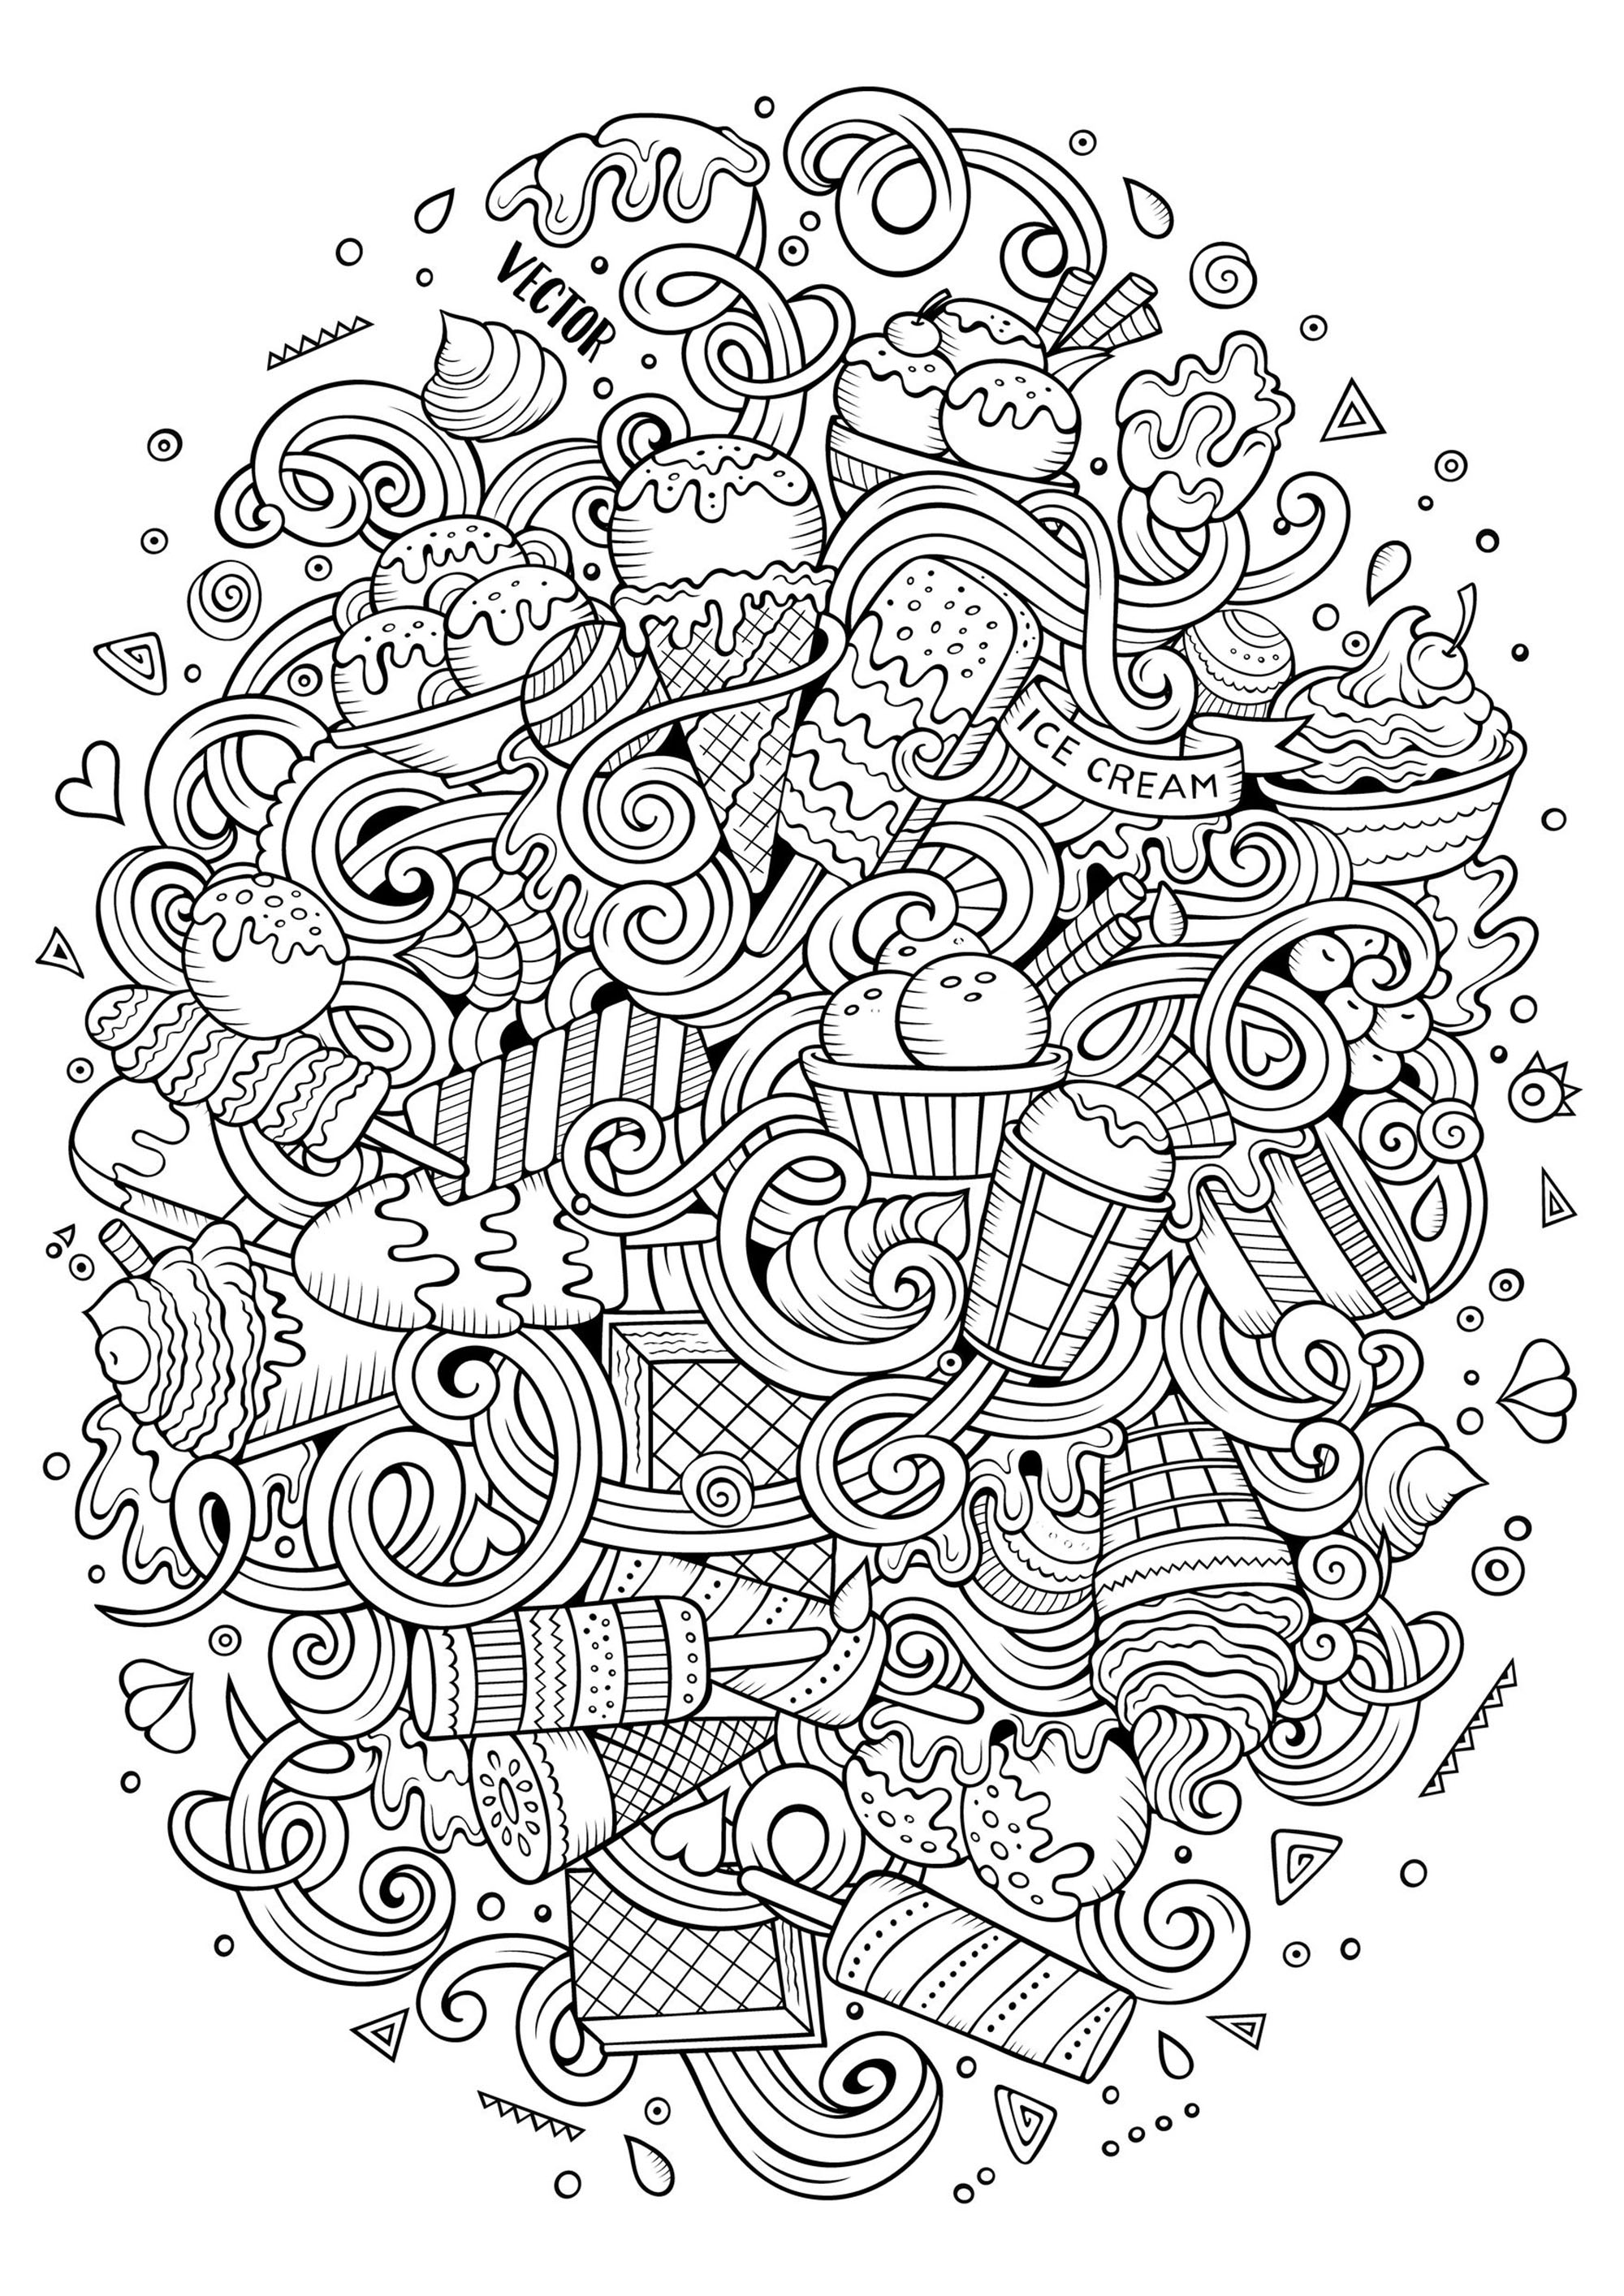 Ice-cream assembly - Cupcakes Adult Coloring Pages